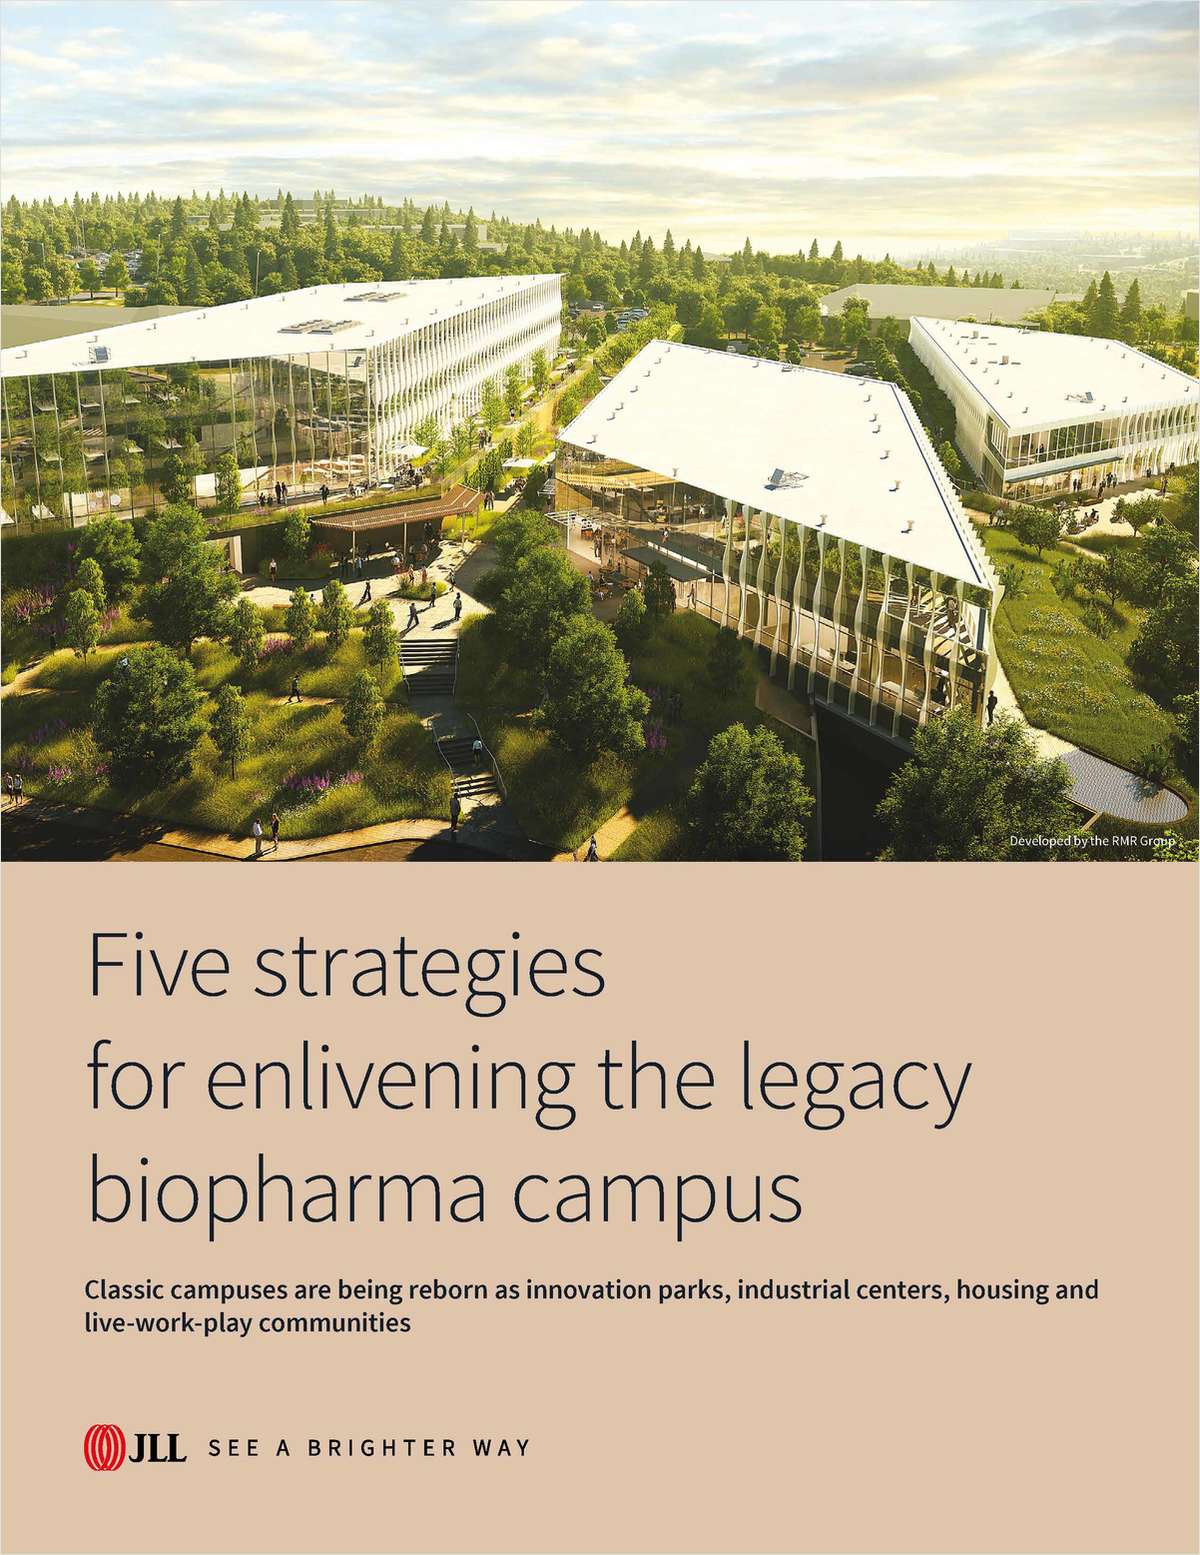 Five strategies for enlivening the legacy biopharma campus